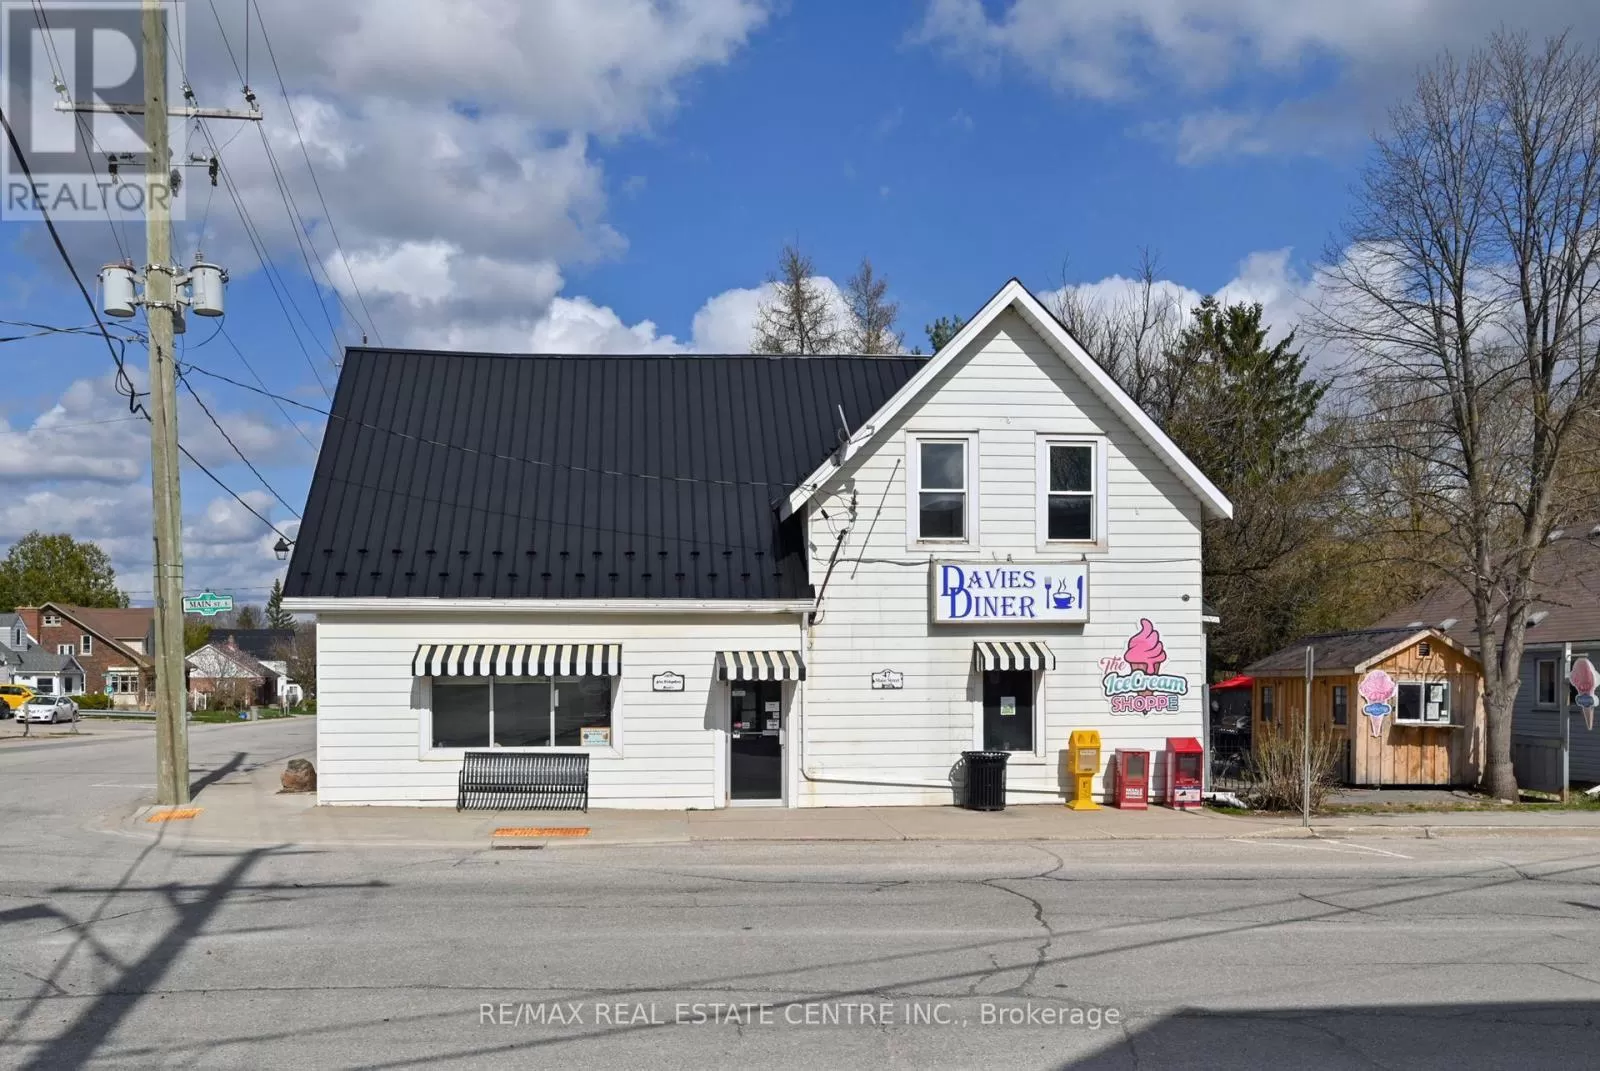 47 Main St, East Luther Grand Valley, Ontario L9W 5S8